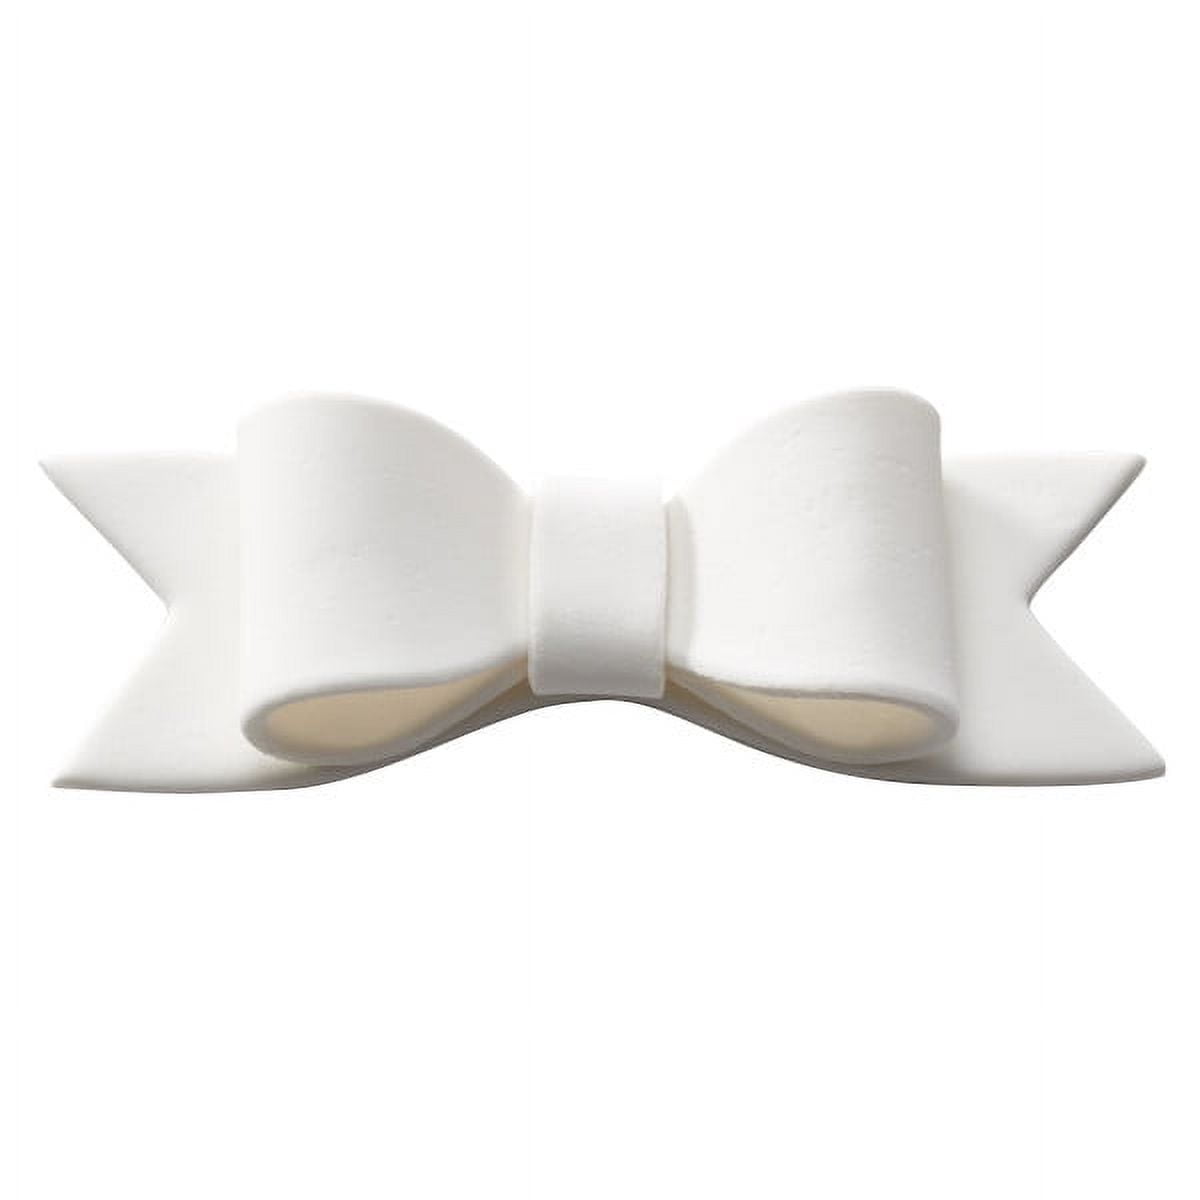 30 Pcs White Pull Bows - Gift Wrapping Ribbon Bows For Various Occasions